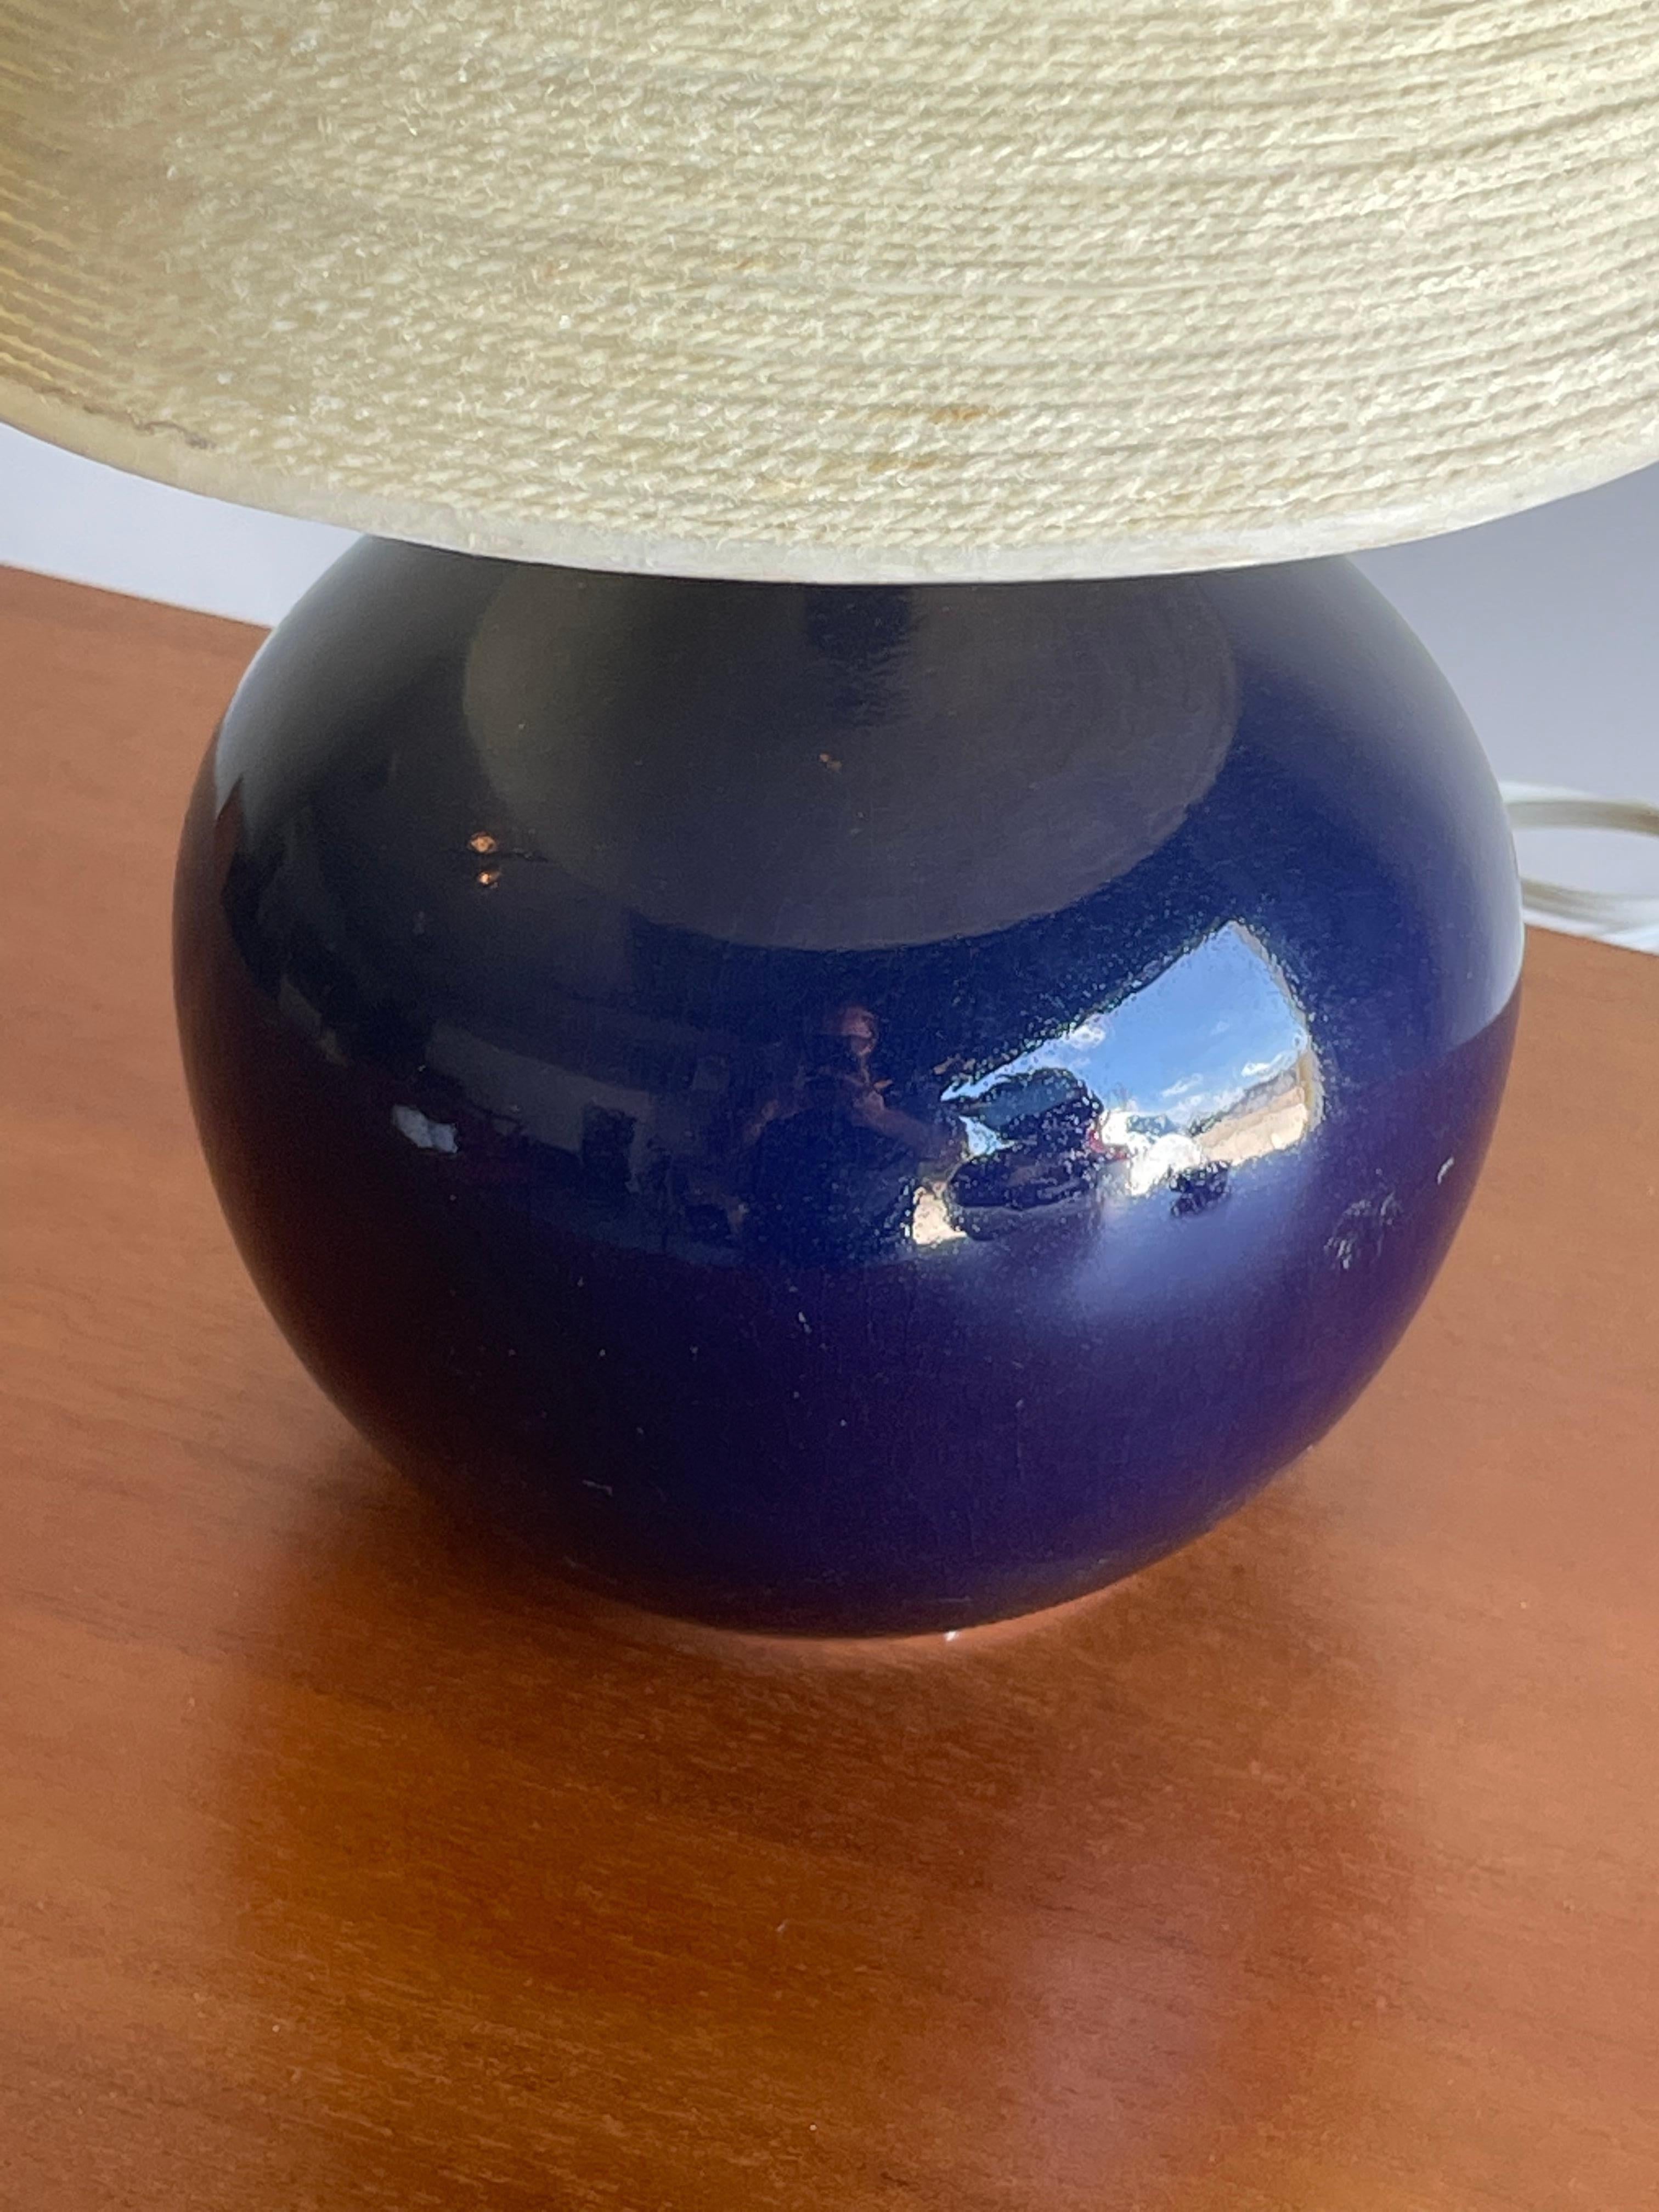 Lotte and Gunnar Bostlund table lamp in royal blue glossy ceramic glaze. Iconic color by duo. While from Denmark, the two operated out of Canada and the US.

Measures: Overall 
16.5” tall

Ceramic portion 
7.5” tall
6.5” wide

Shade
6.25”